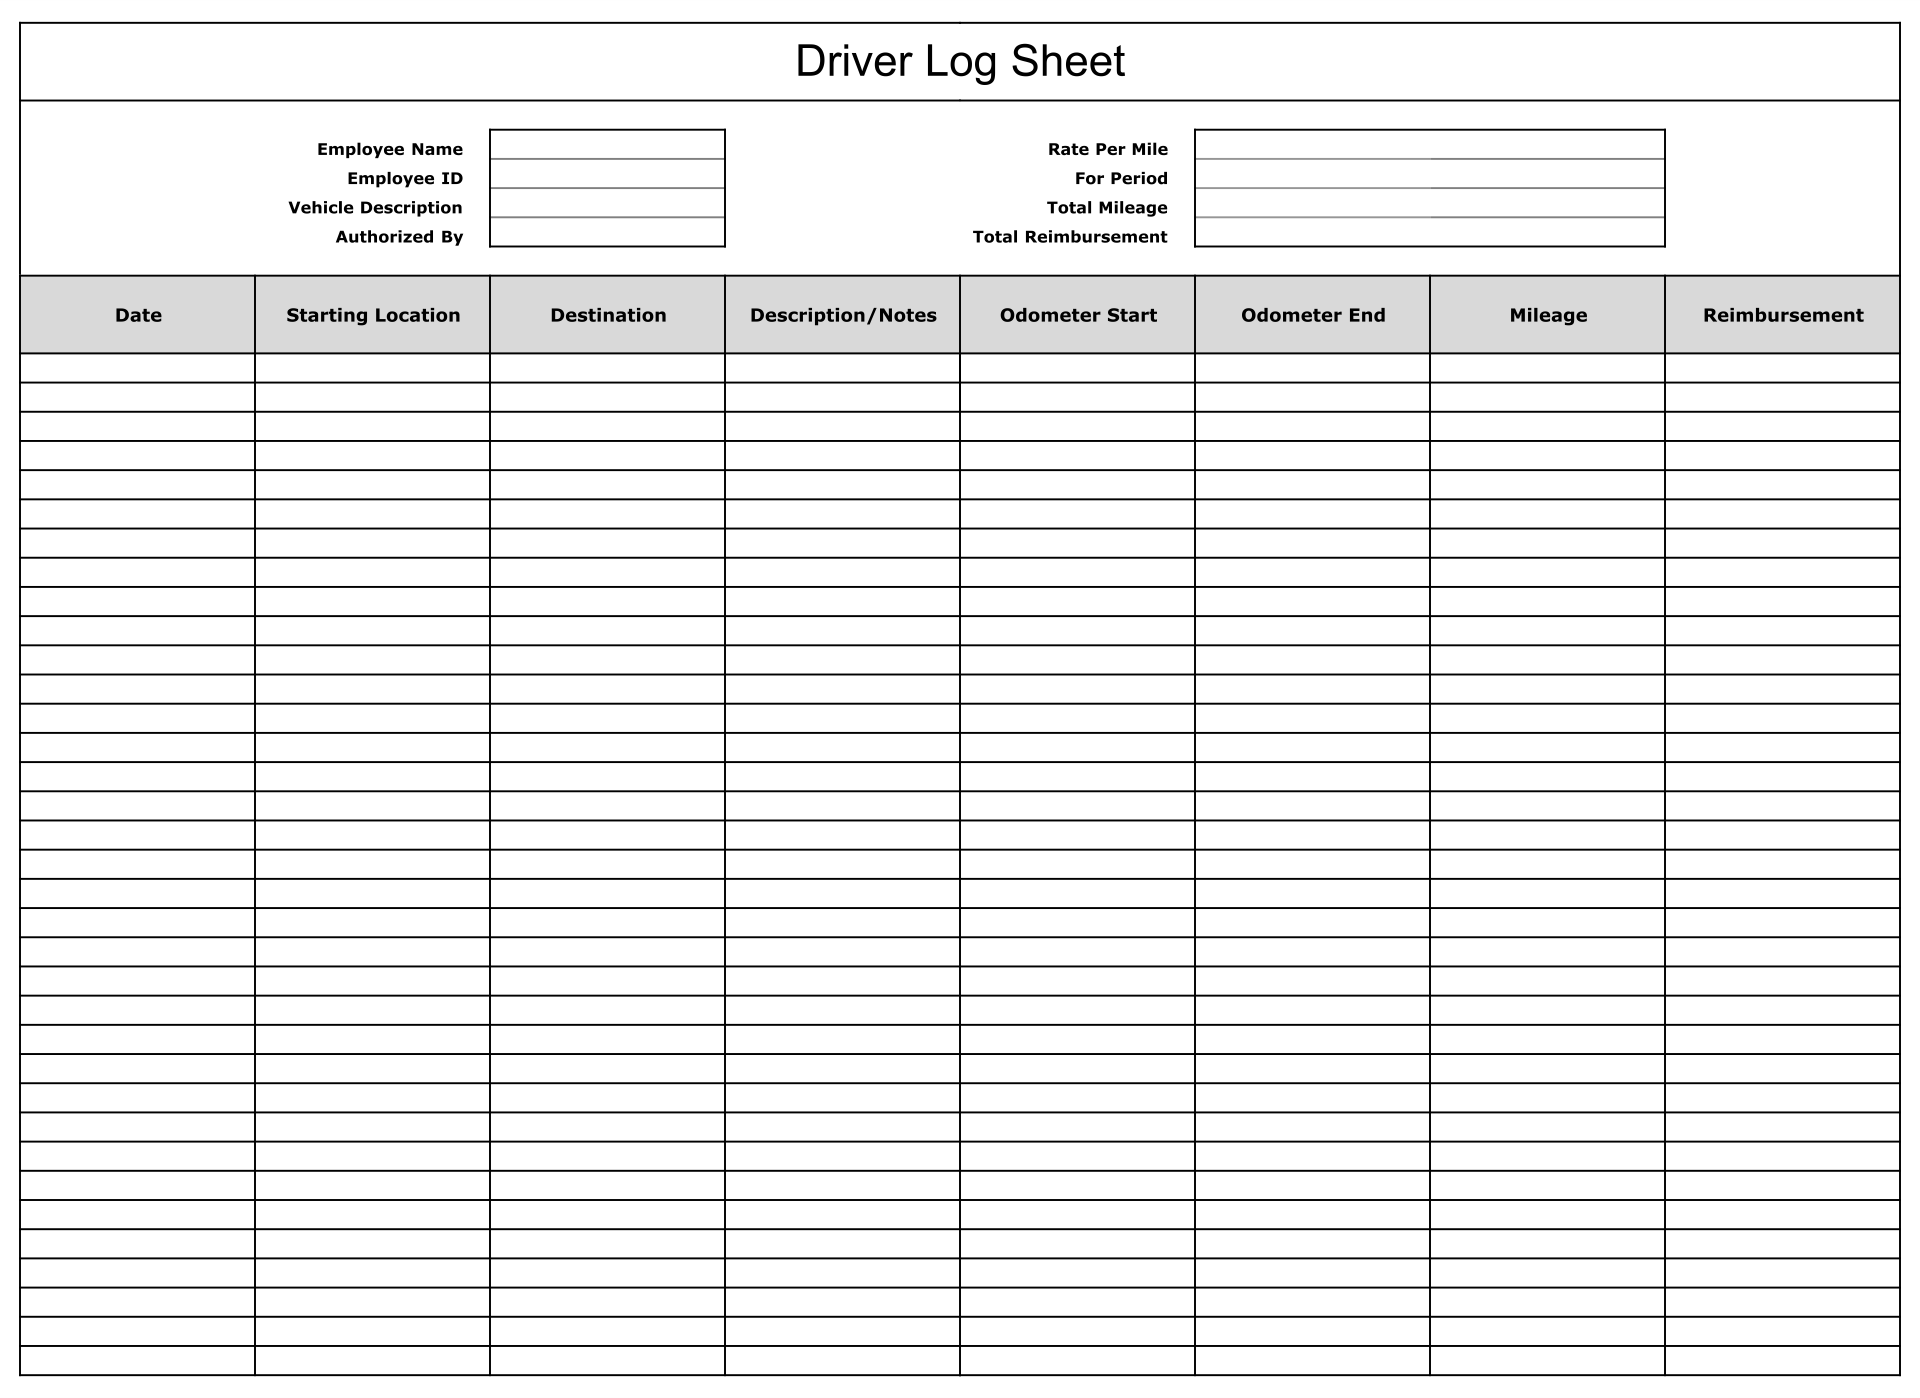 7 Best Images of Free Printable Trip Sheets Driver Trip Log Sheet